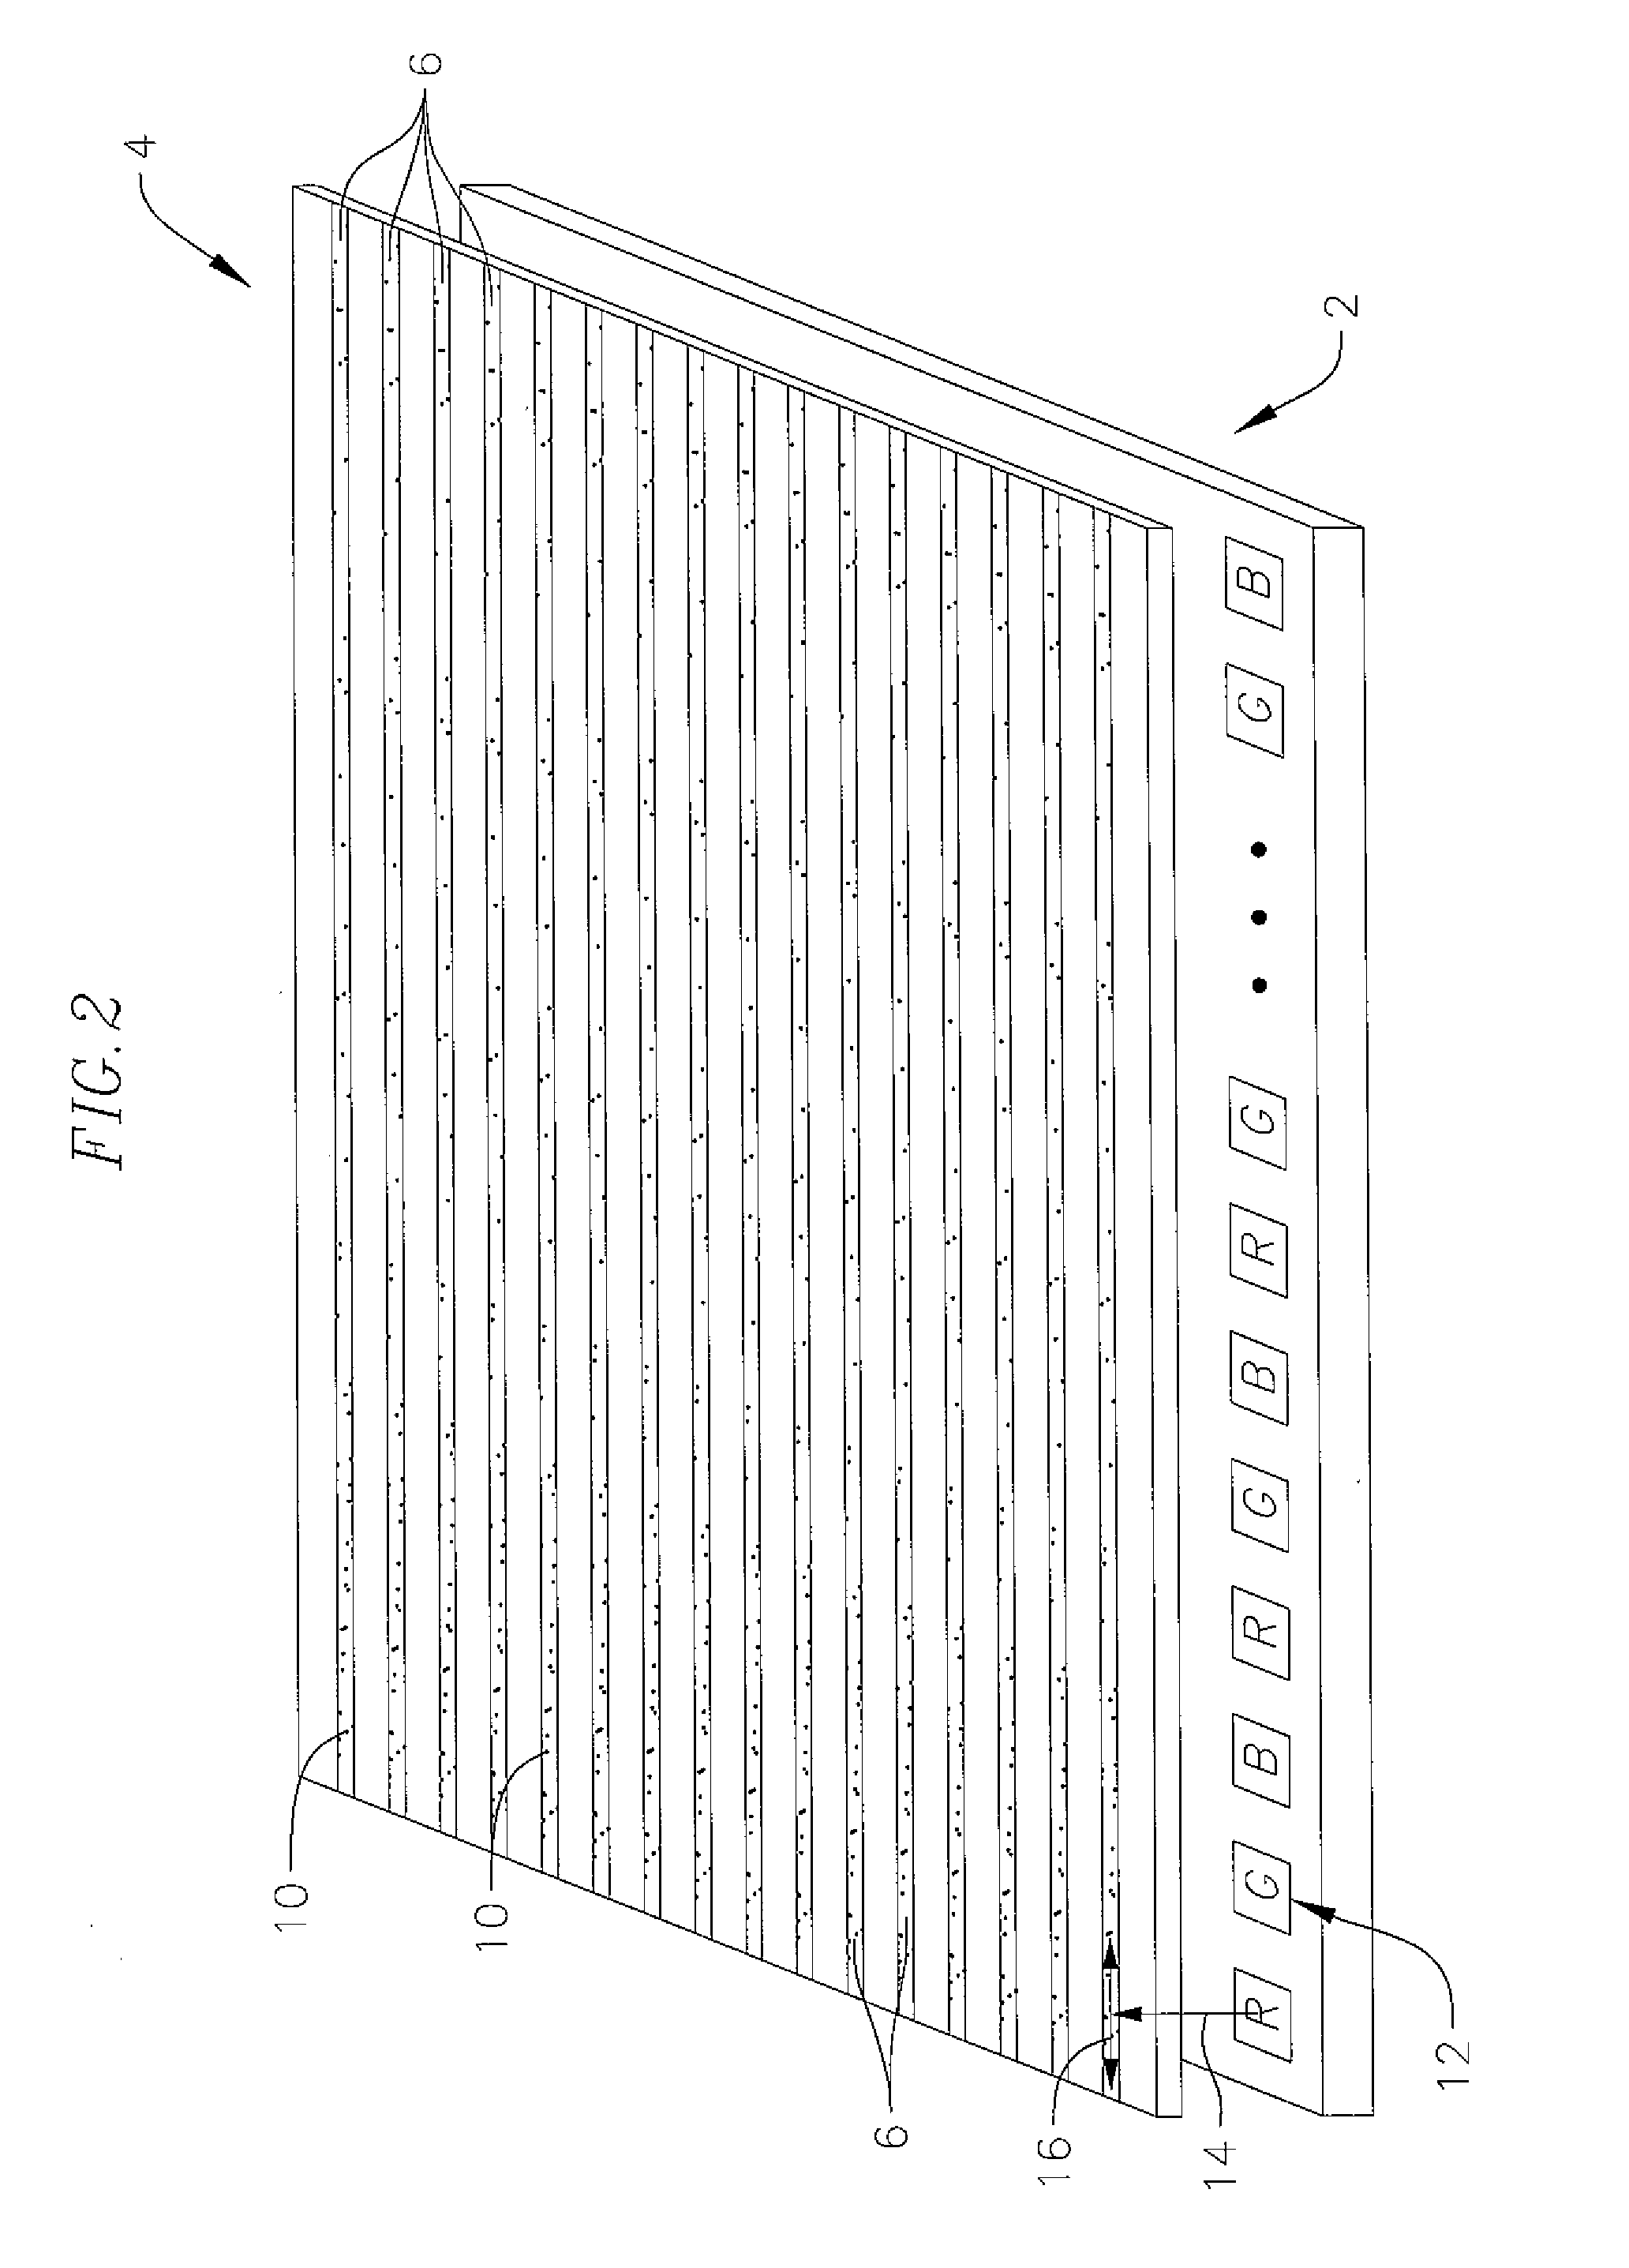 Apparatus and method of direct monitoring the aging of an OLED display and its compensation